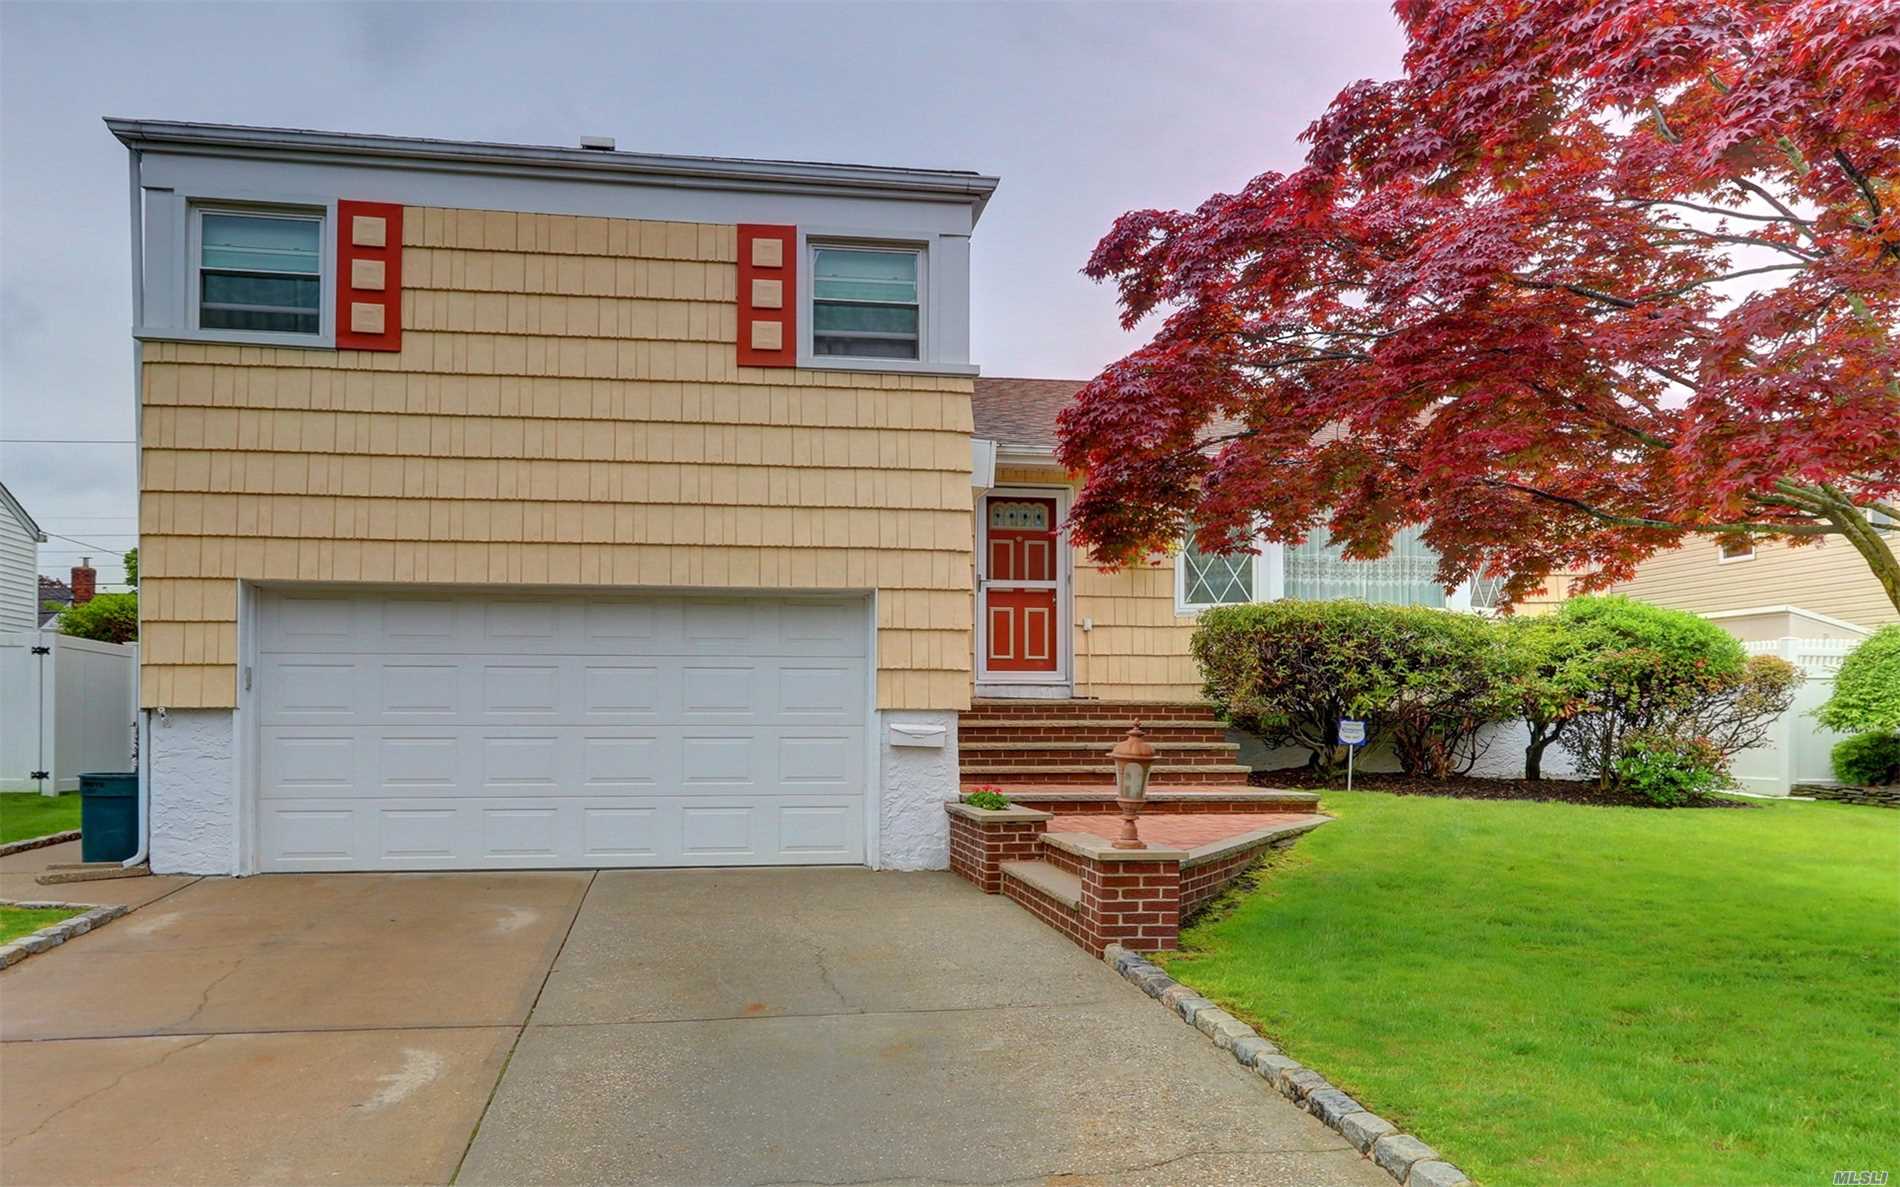 This Is A Very Large Well-Maintained Split In Plainedge School District. Rooms Are All Very Big And It Does Have 4 Levels, Full Basement W/ Wet Bar, Newer Windows, Roof, Gas Burner And Water Tank, 200 Amp Electric. Beautifully Manicured Backyard, Shed(Gift), Ag Pool(Gift) Nice Size Den/Office Sliders To Patio, Good Size Master/ Family Bath Has Tub W/Jets, Big Attic All Floored With Electric. Mrs Clean Lives Here